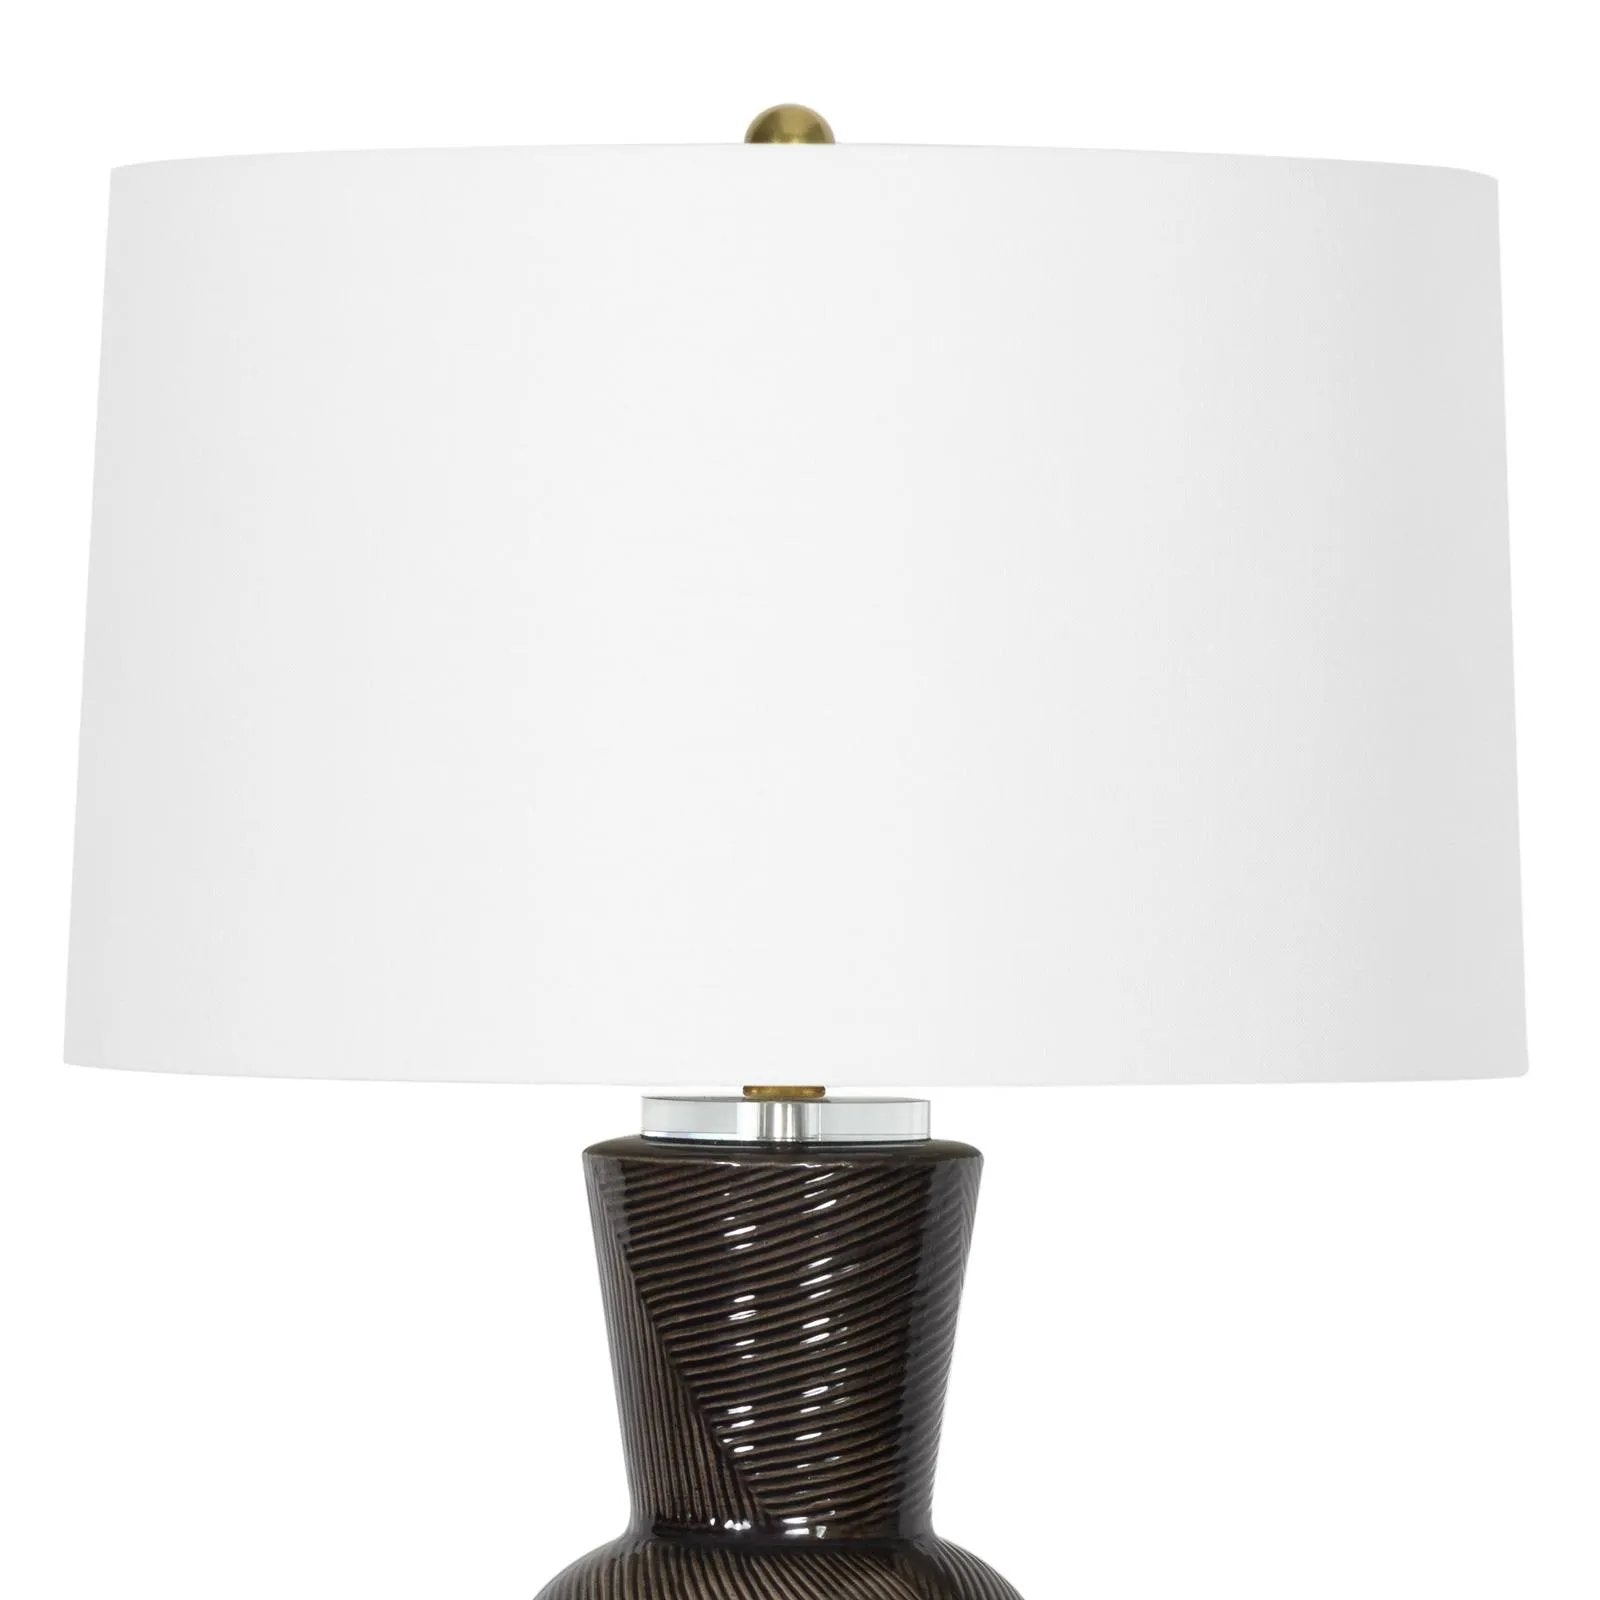 With its alluring silhouette, the Hugo ceramic table lamp brings contemporary appeal and modern contrast to interiors. Employing a specialized glazing technique, master artisans hand-shape earthenware to produce a luxurious finish for subtle highs and lows that shift with the light source above. Amethyst Home provides interior design, new home construction design consulting, vintage area rugs, and lighting in the Tampa metro area.